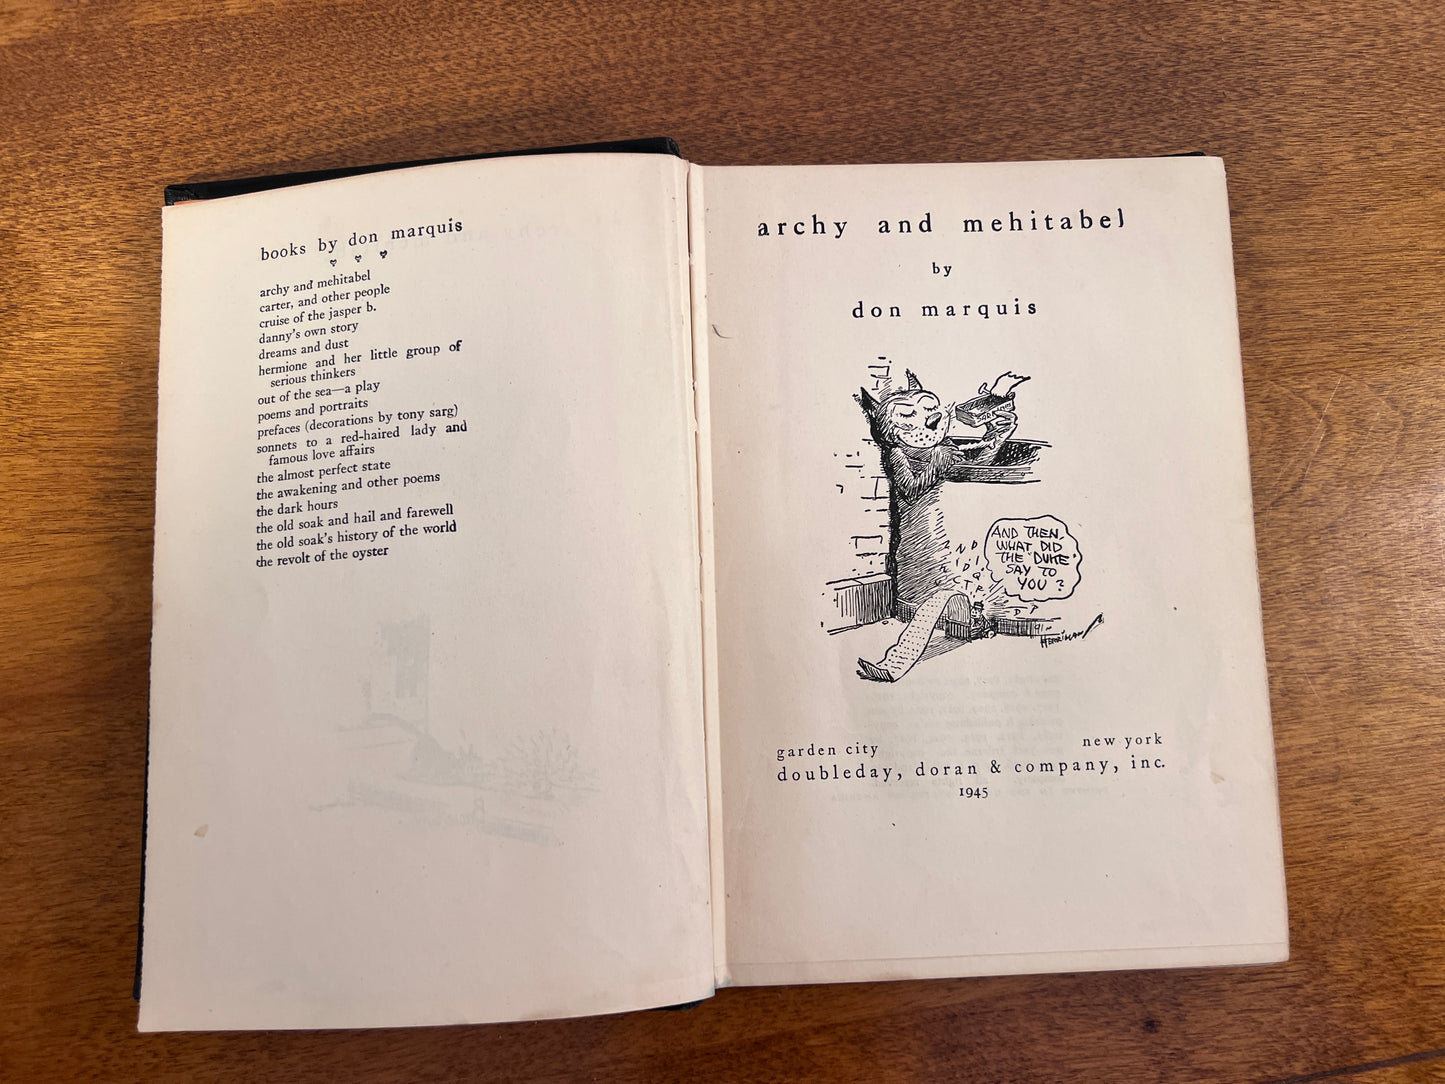 Archy and Mehitabel by Don Marquis 1945